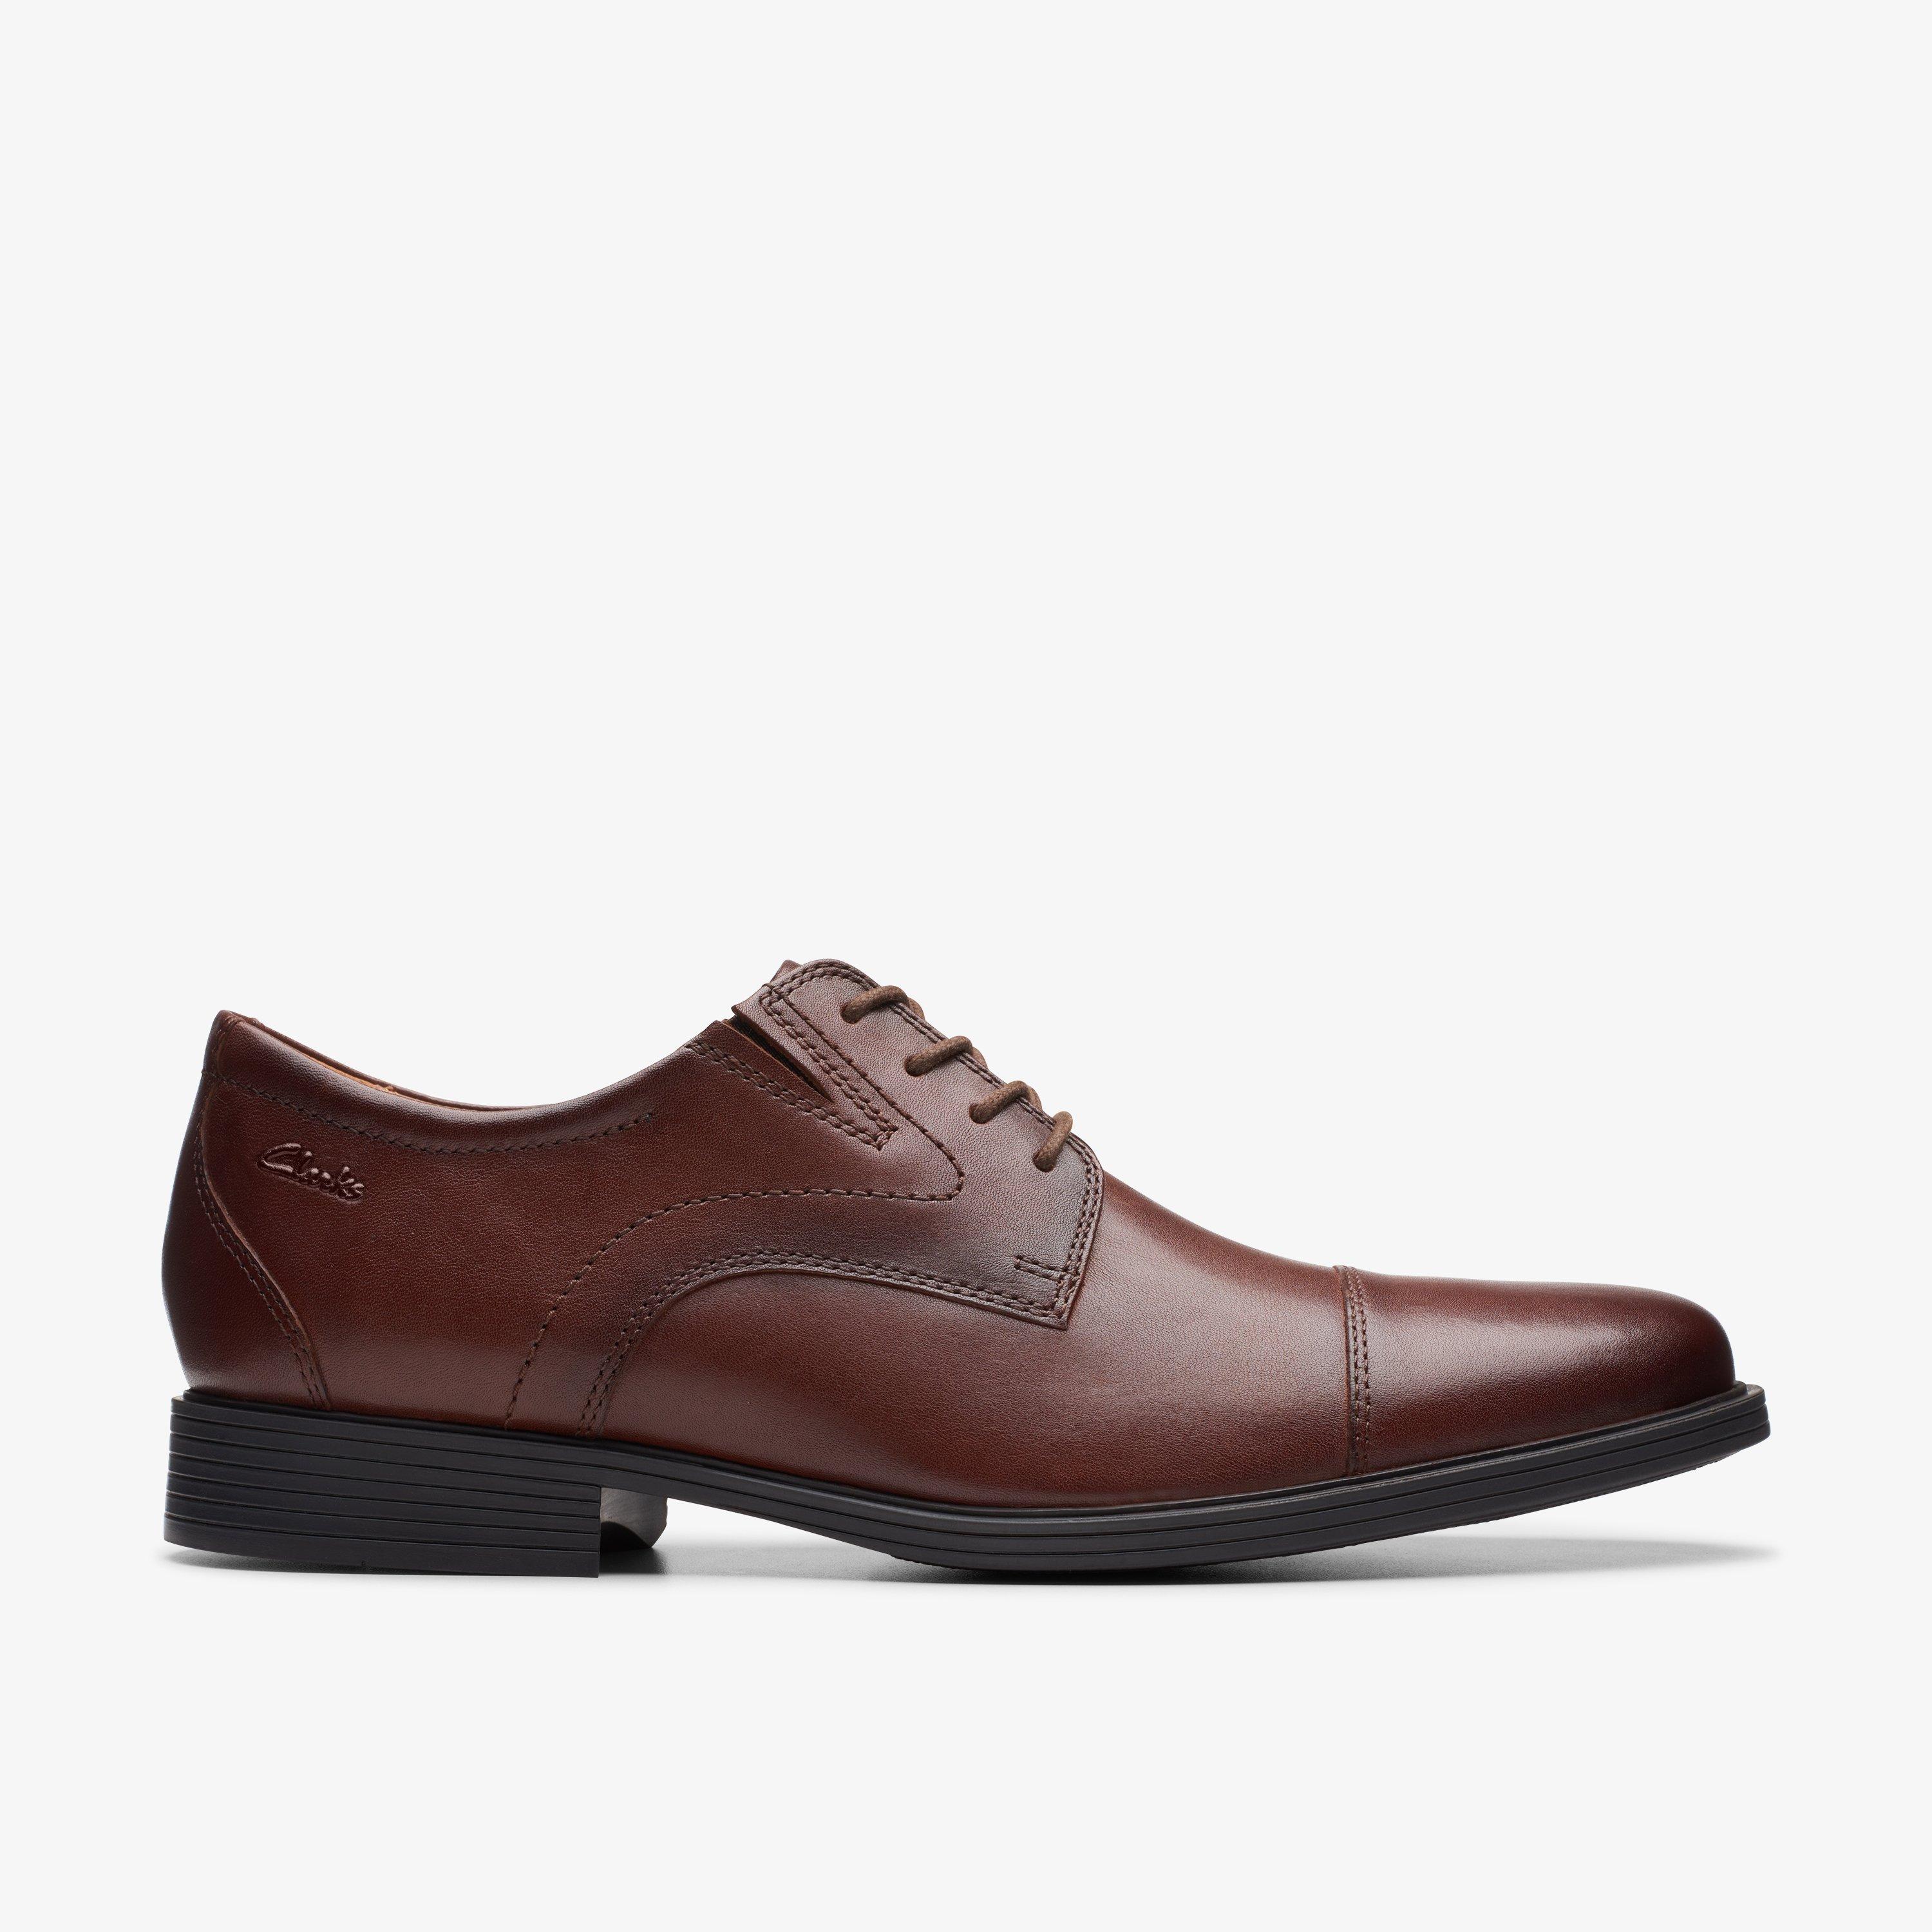 MENS Whiddon Cap Mahogany Leather Oxford Shoes | Clarks CA